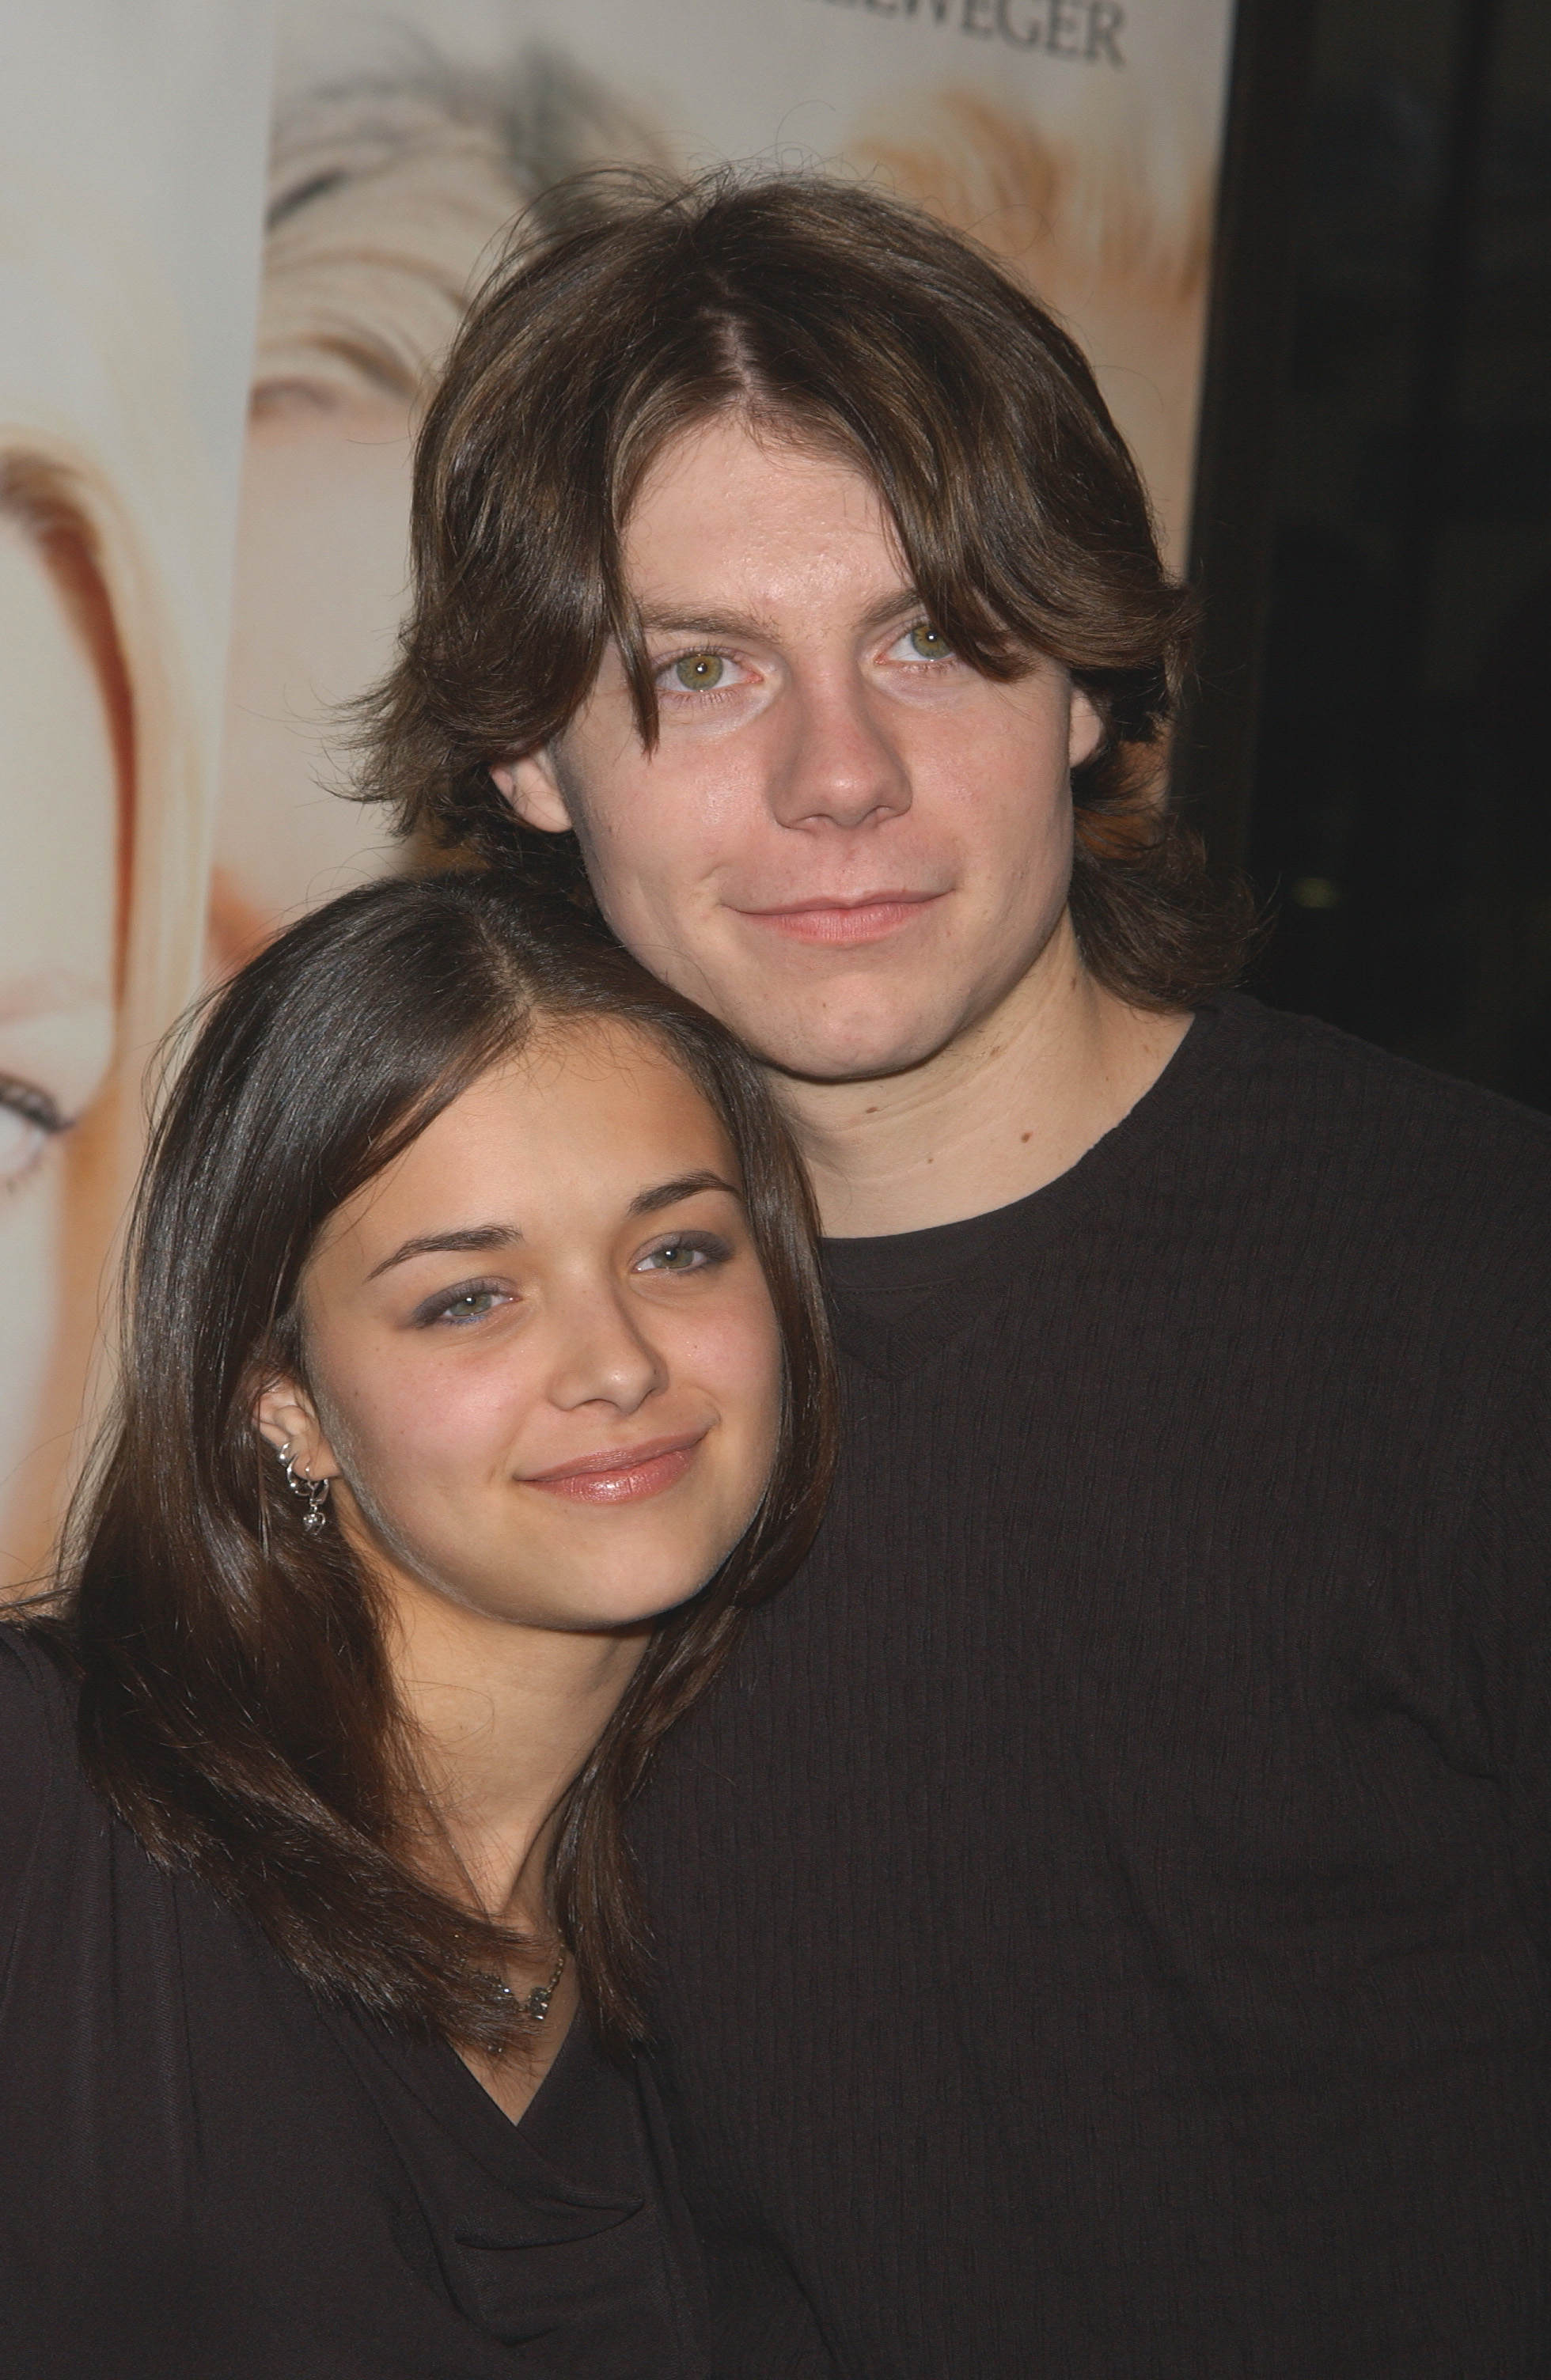 Patrick Fugit and Vita Rayne during the "White Oleander" premiere in Los Angeles. | Source: Getty Images